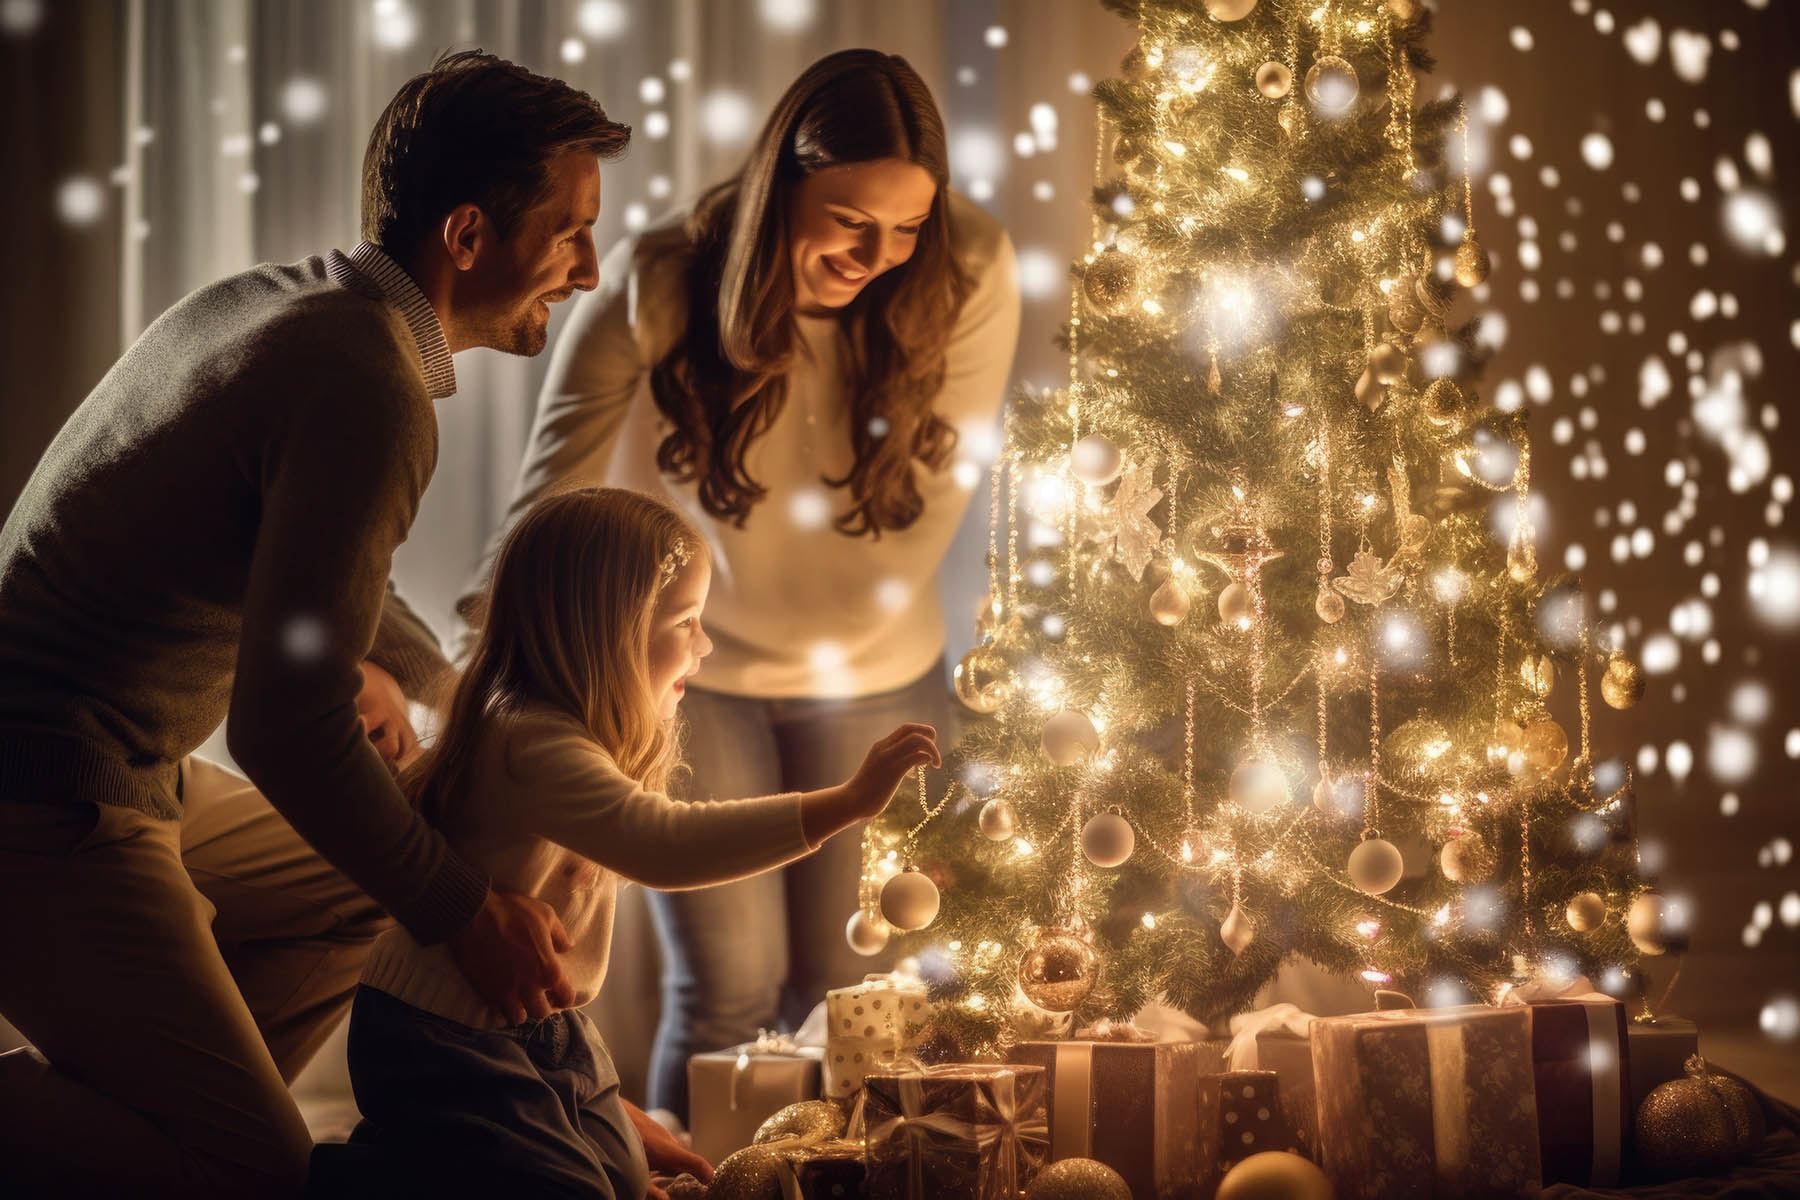 The Art of Christmas Tree Lighting: Best Practices and Creative Display Ideas